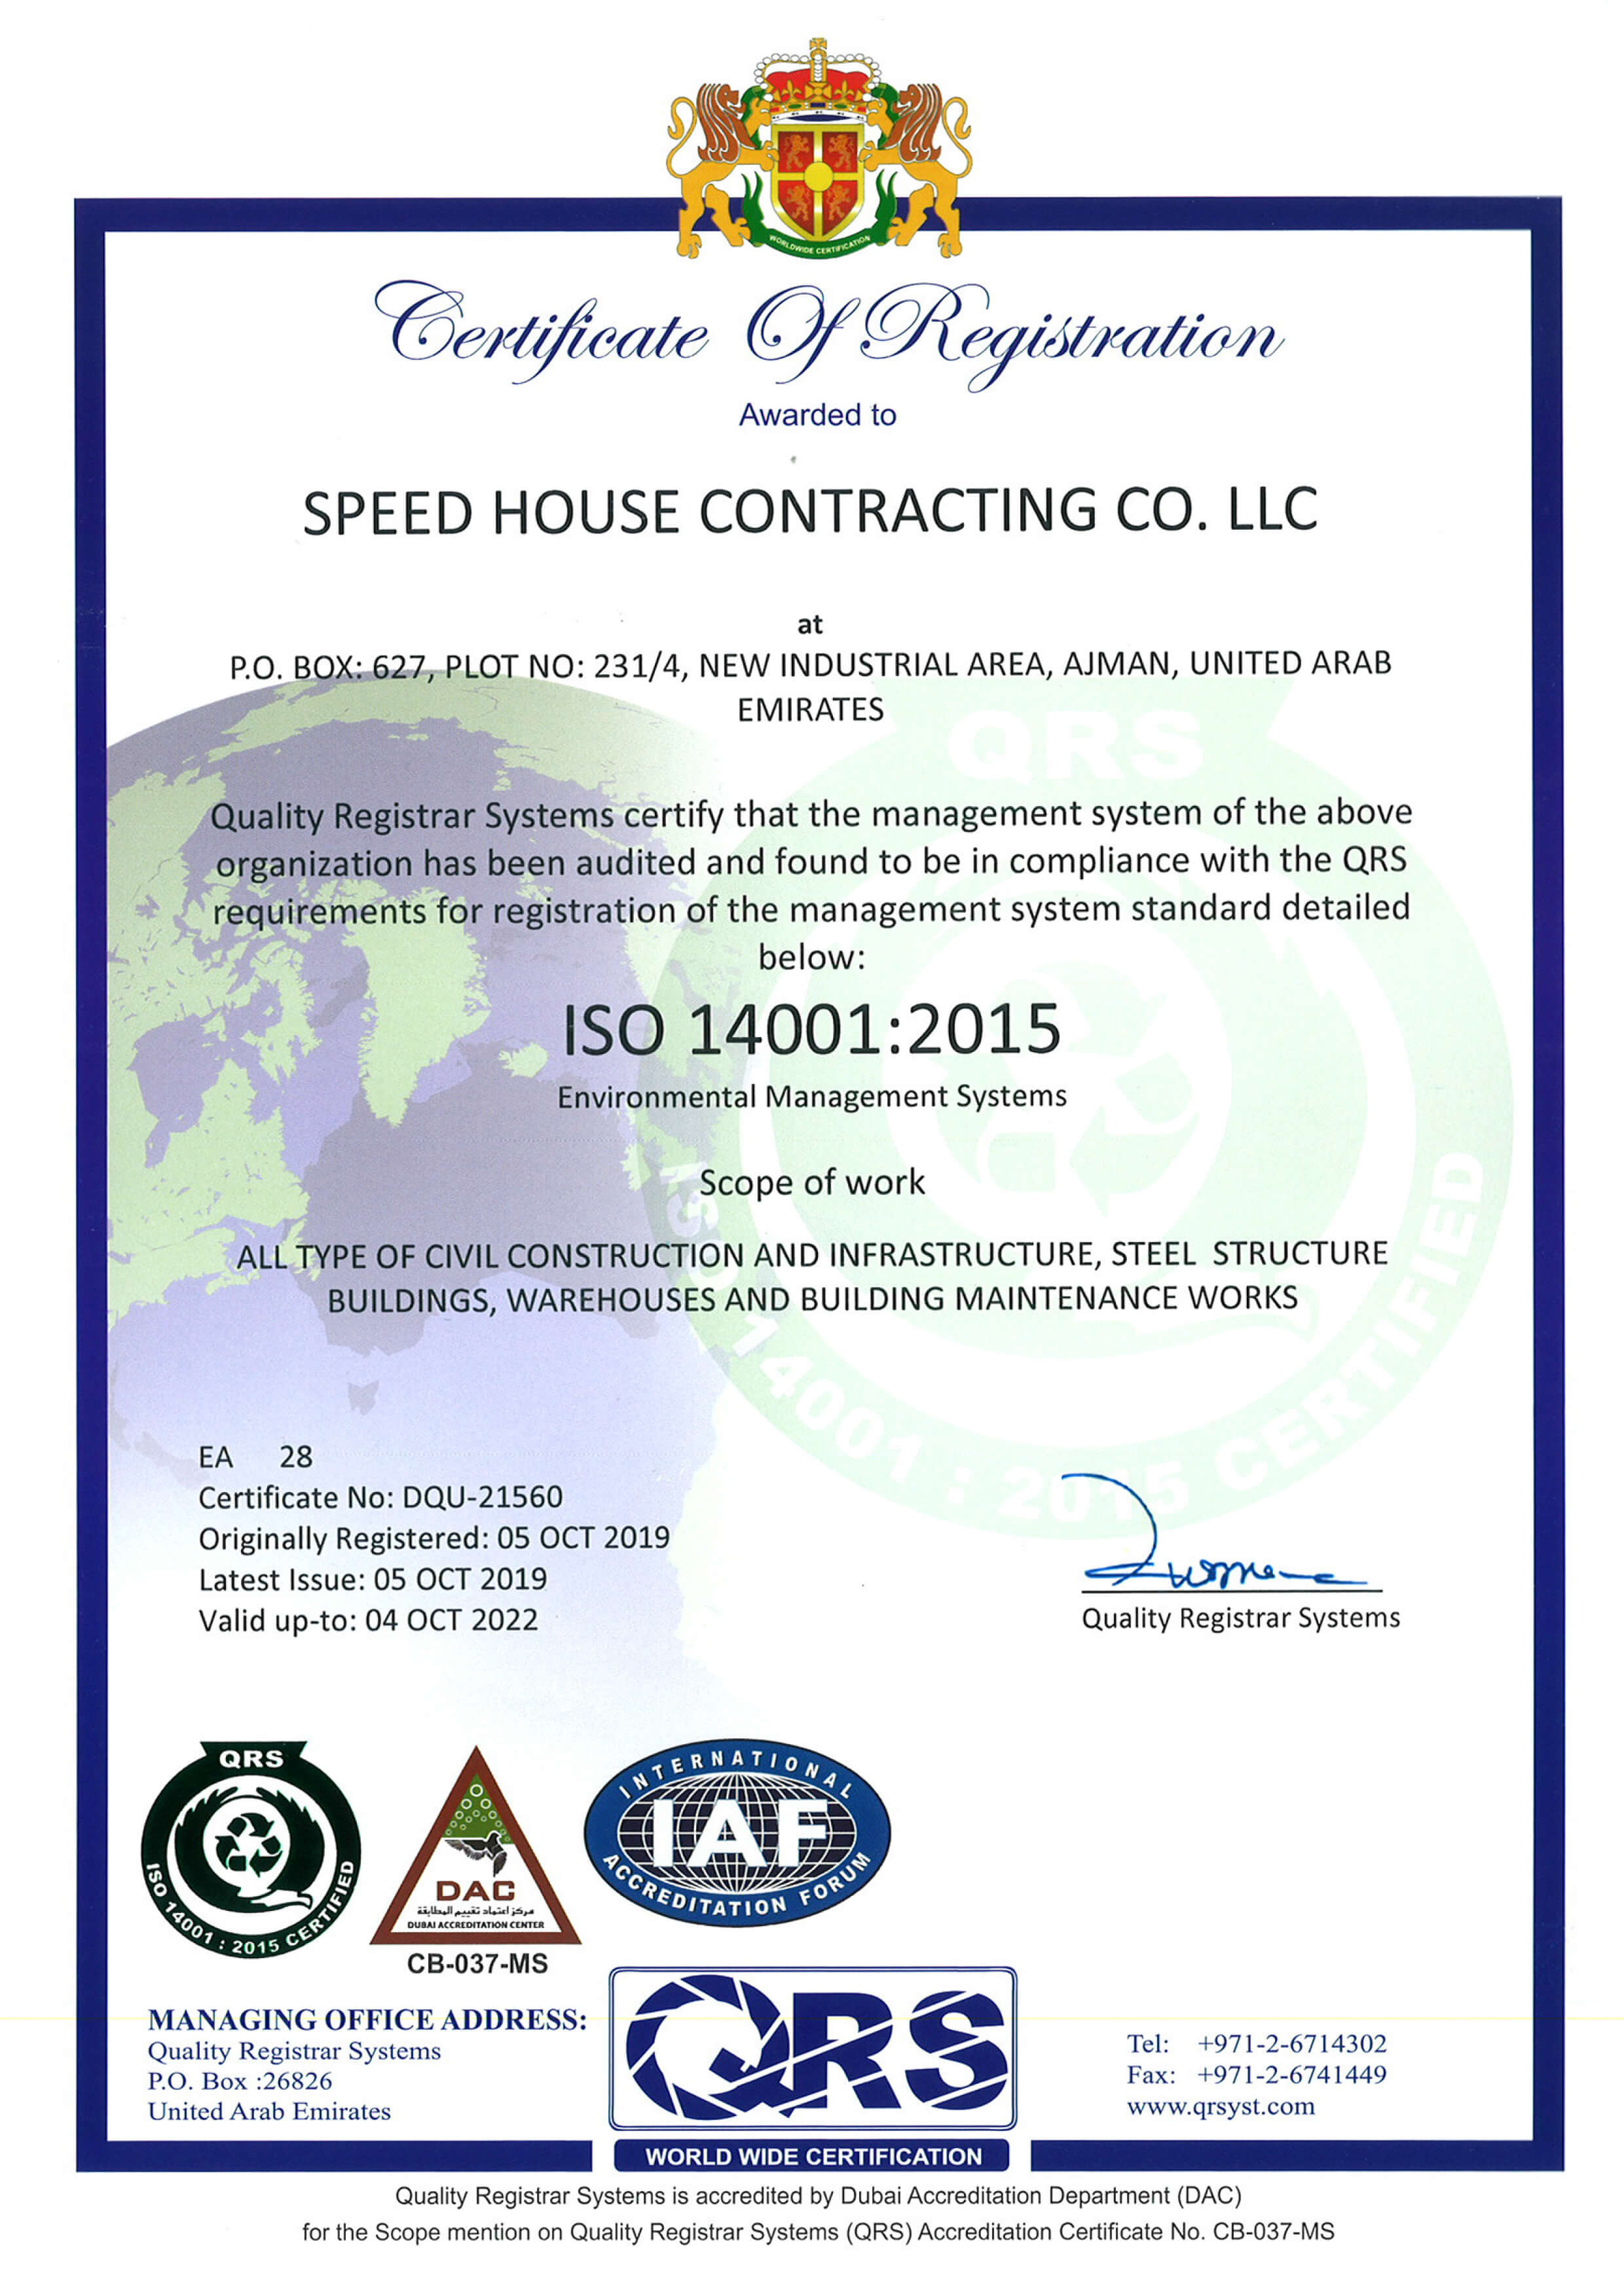 Speed House Group Prefab ISO 14001 Certificate